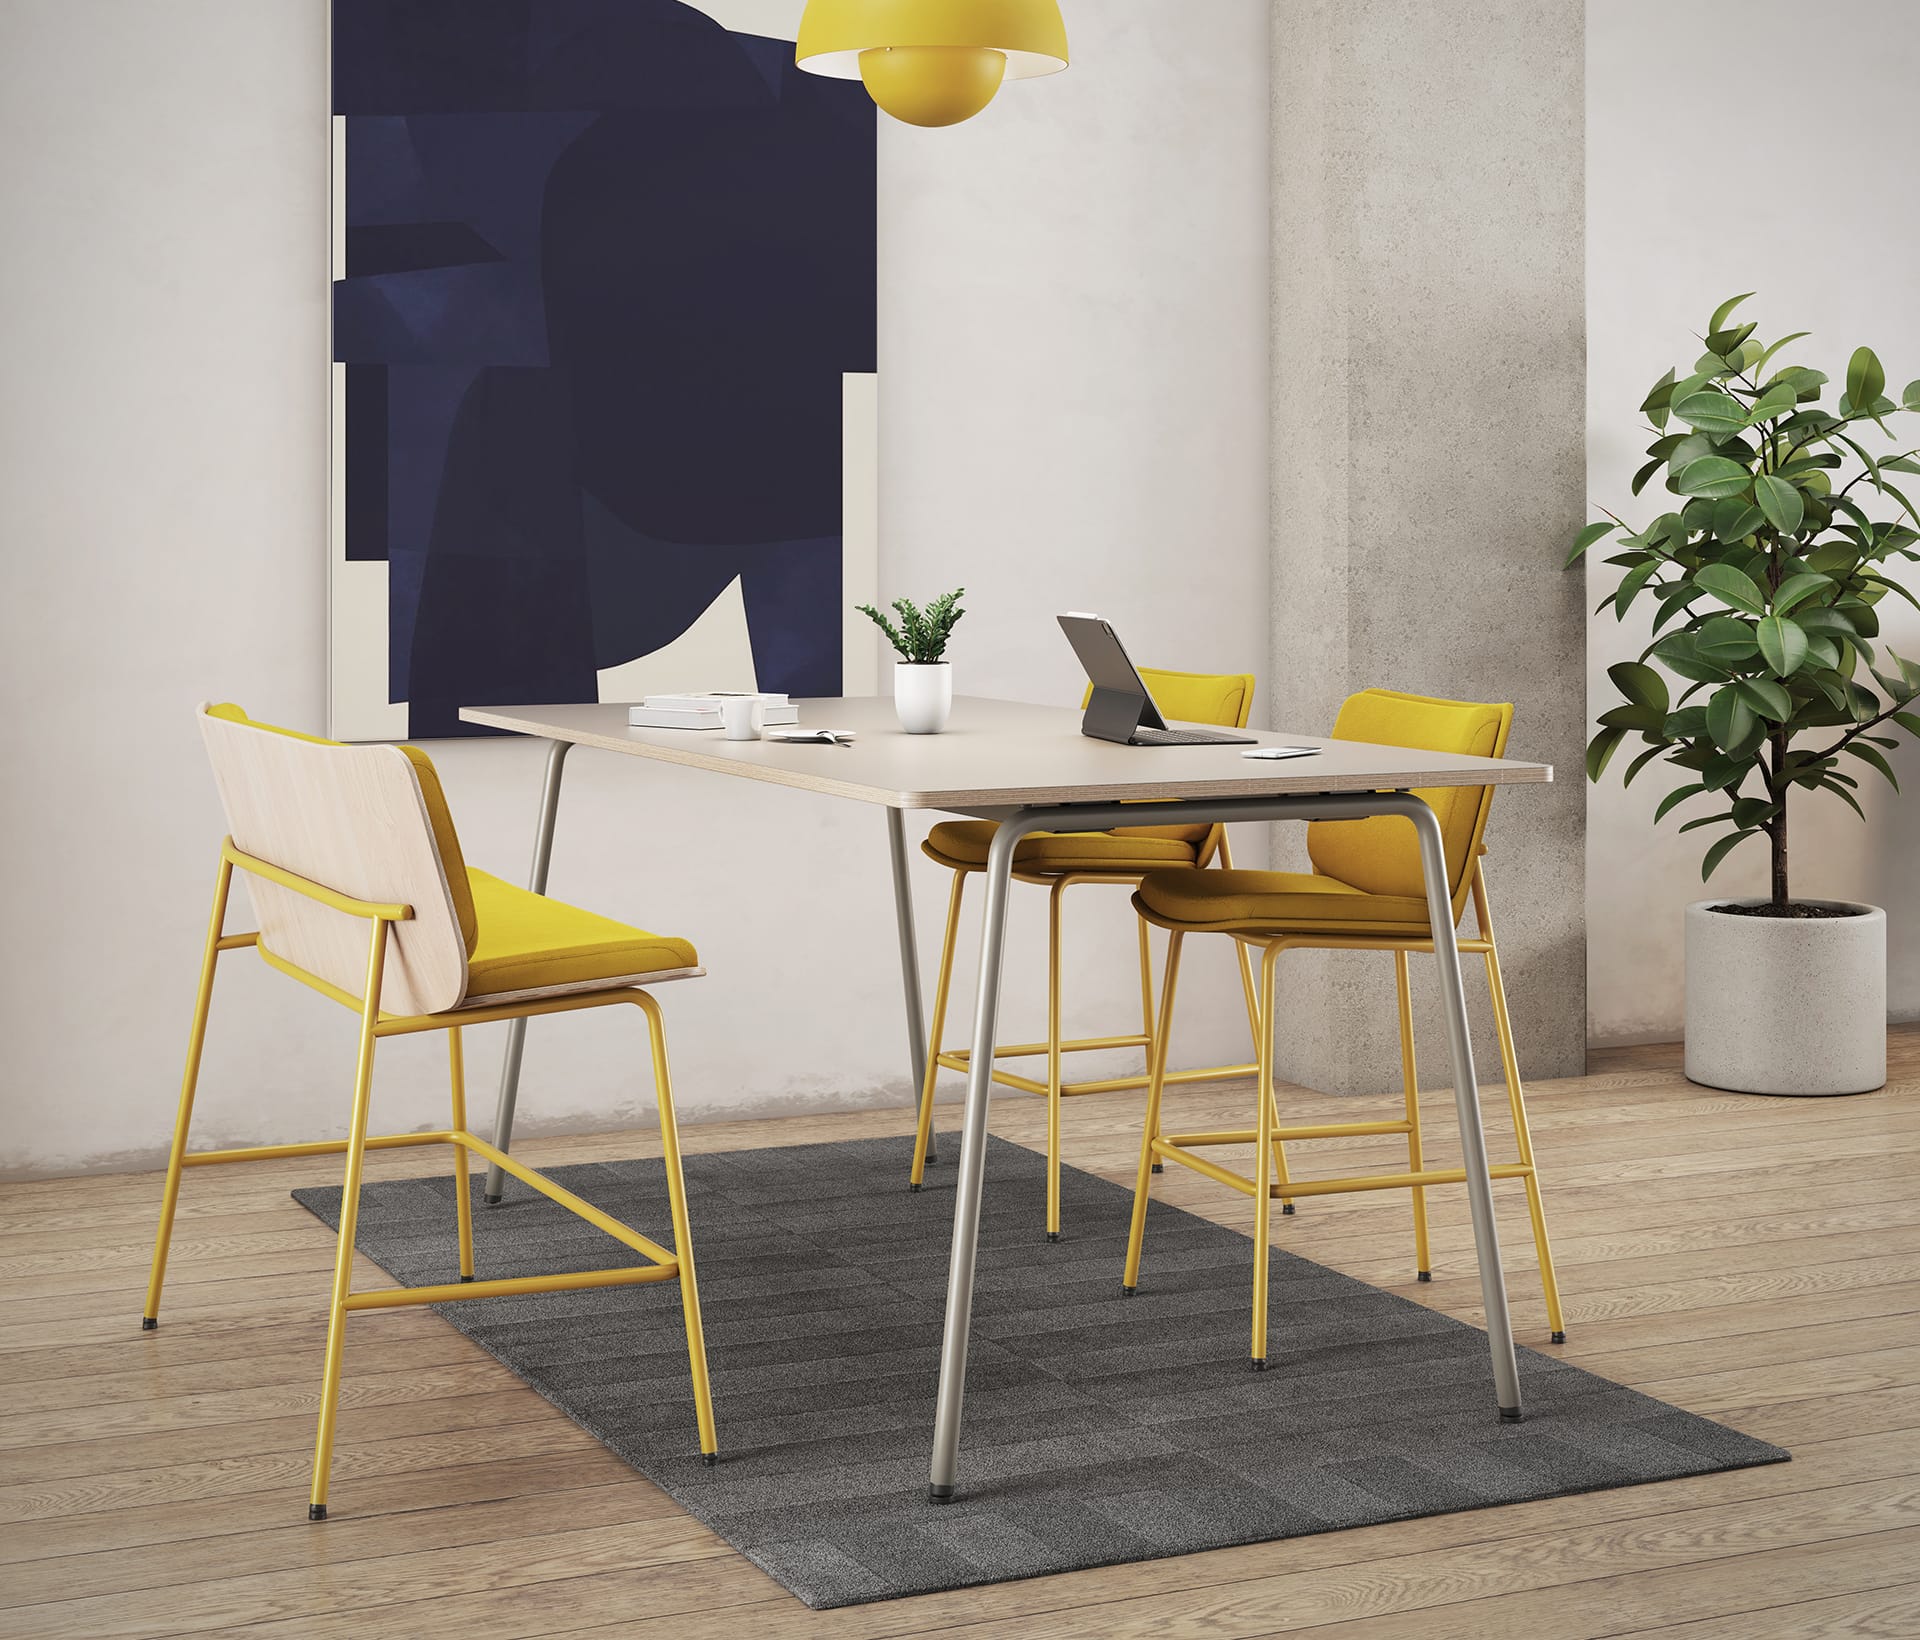 A room with a yellow standing height tables and counter chairs 